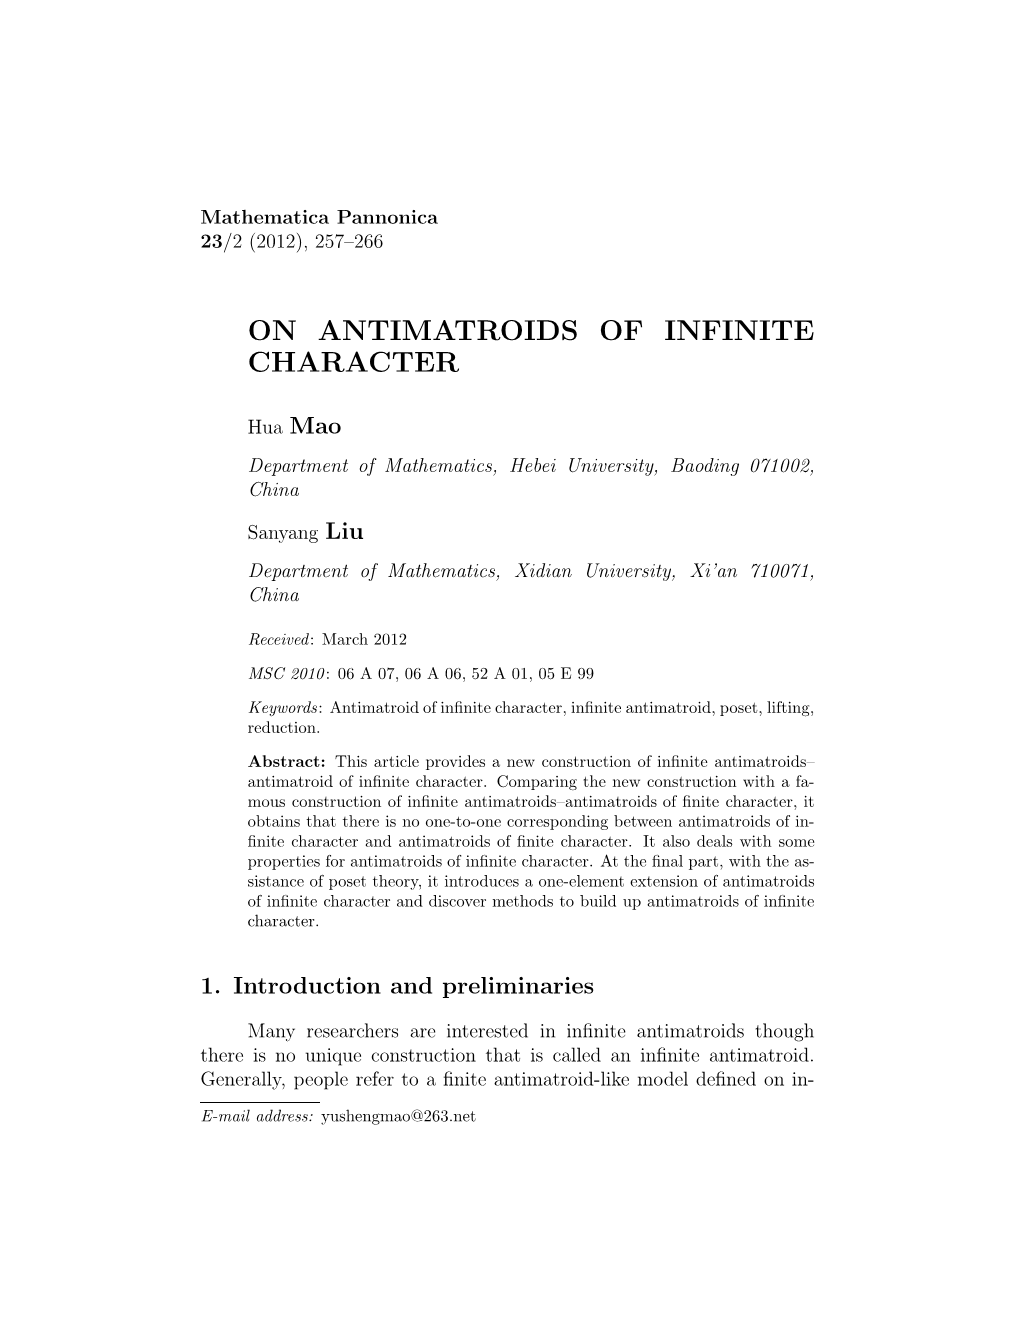 On Antimatroids of Infinite Character